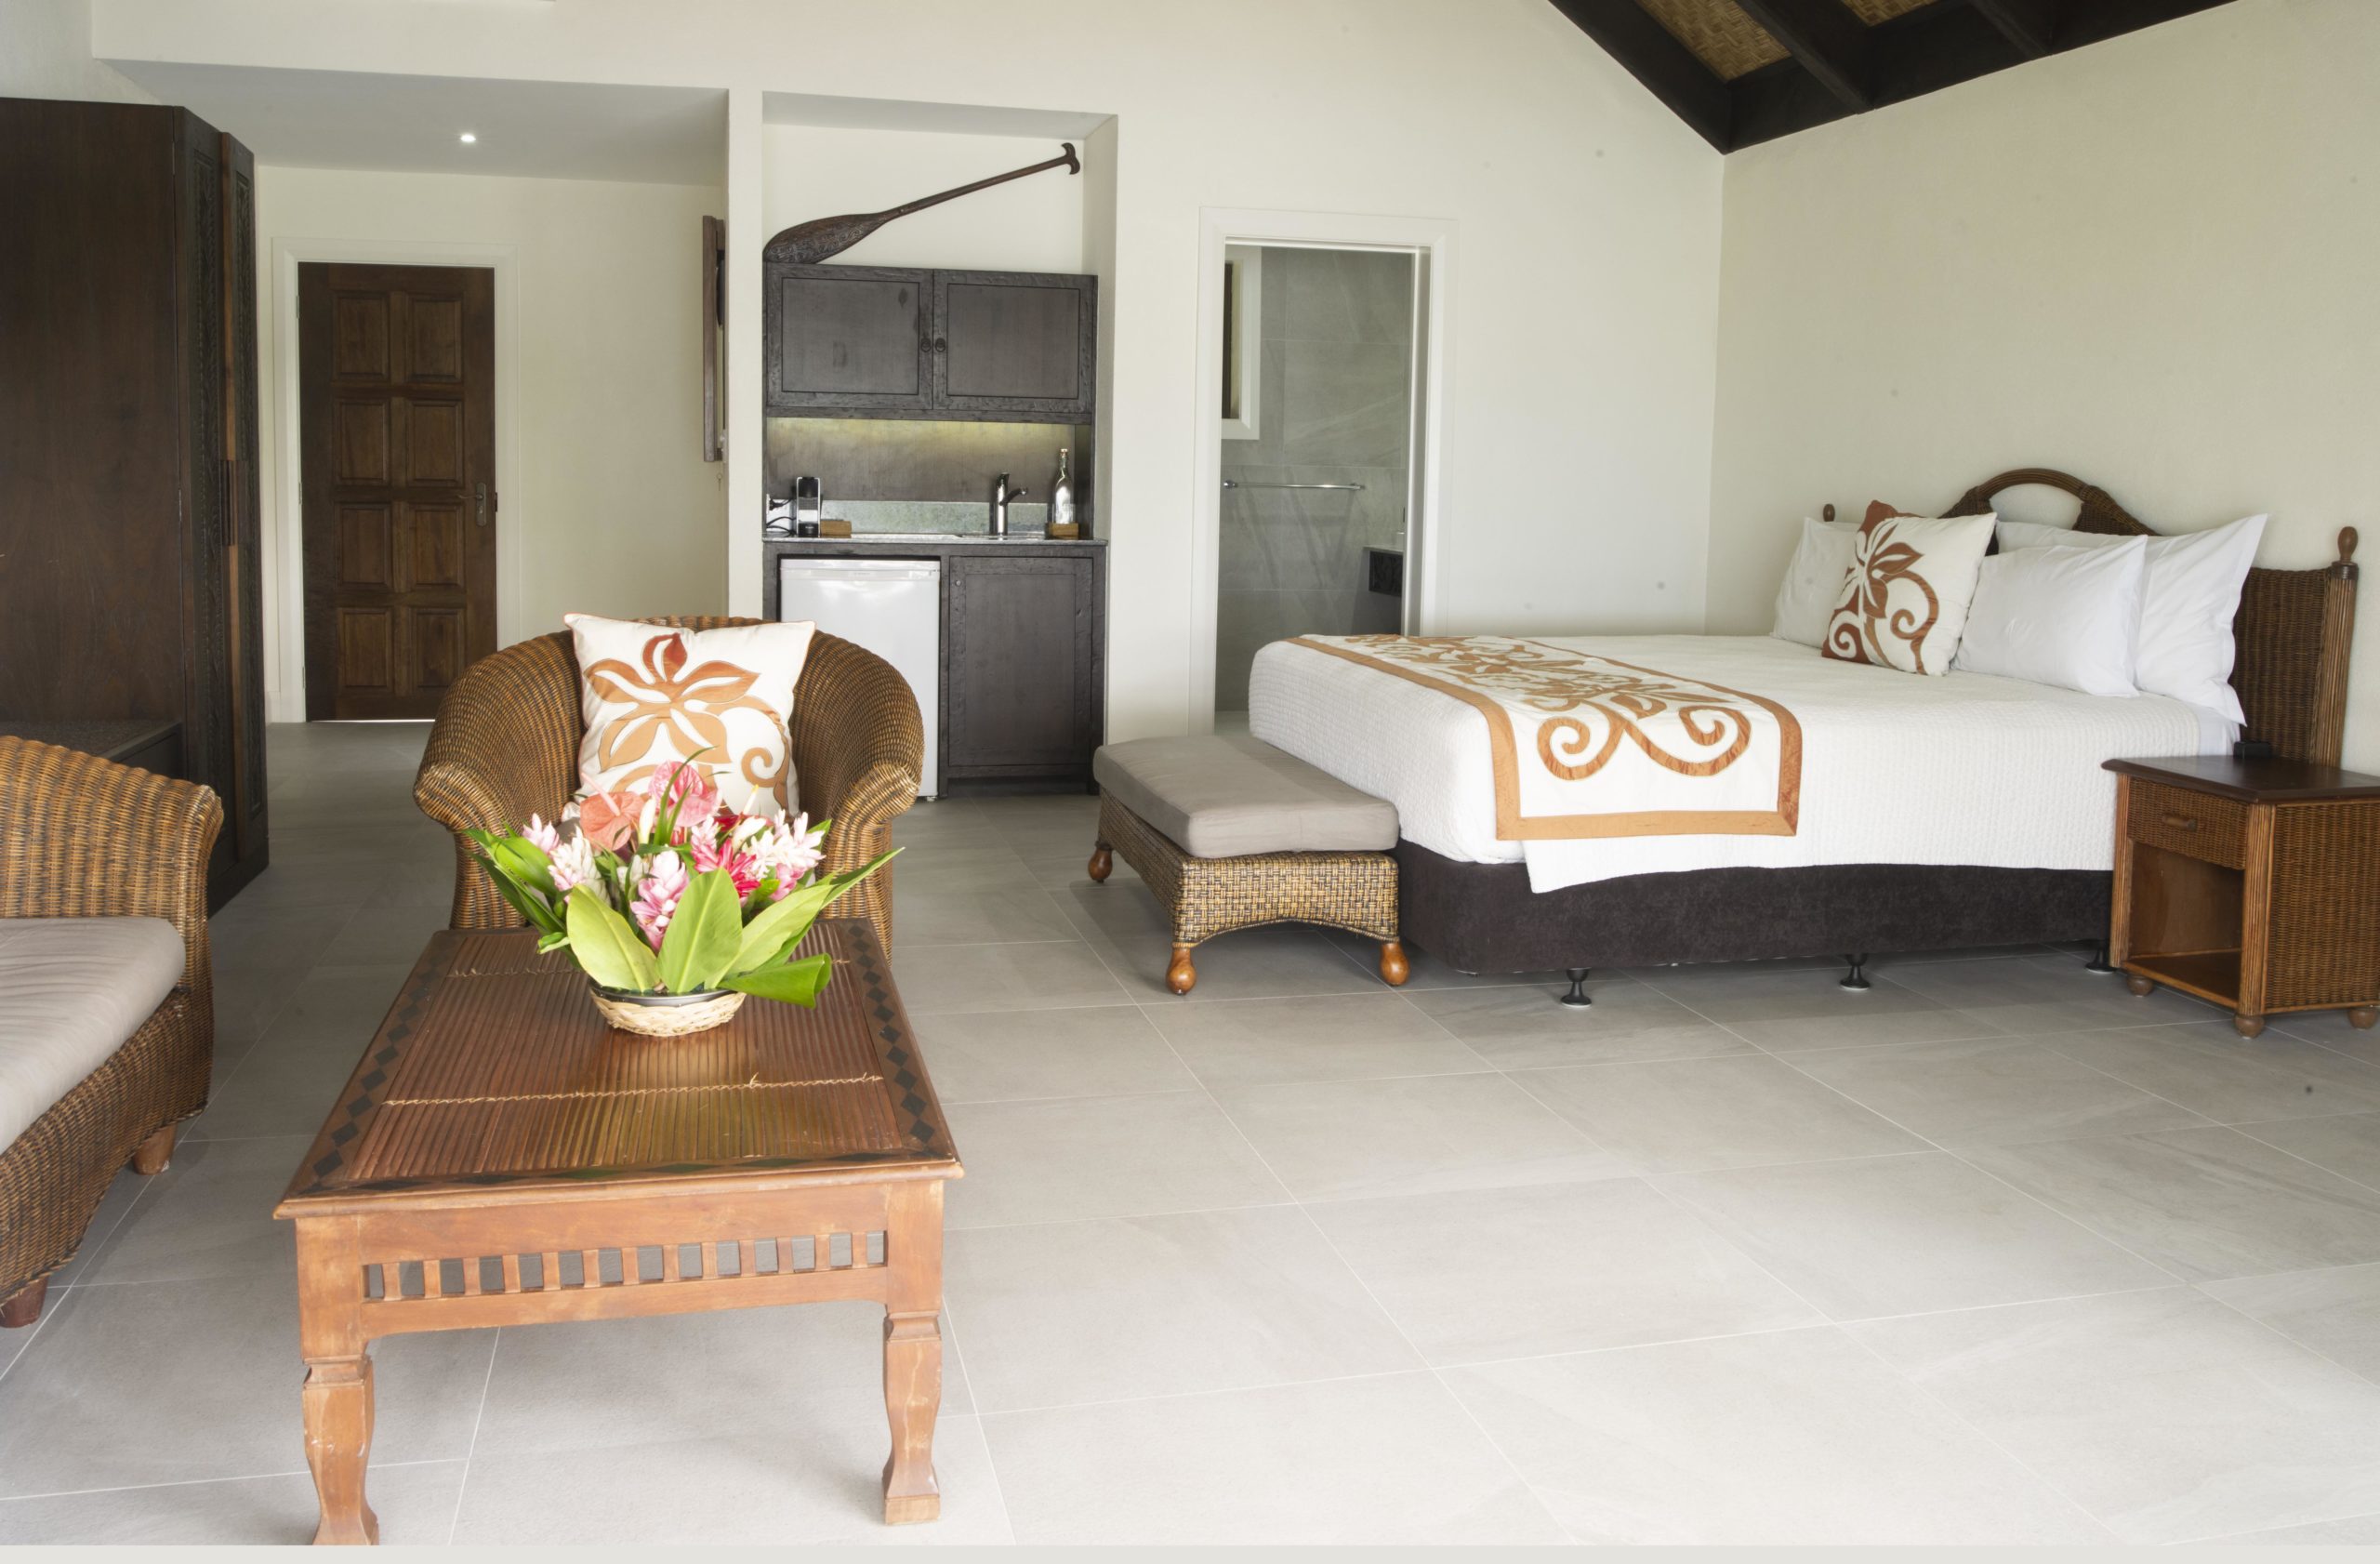 Premium Beachfront Suite showcasing the comfortable super king sized bed and spacious open-plan layout that allows the cool sea breeze to sway in